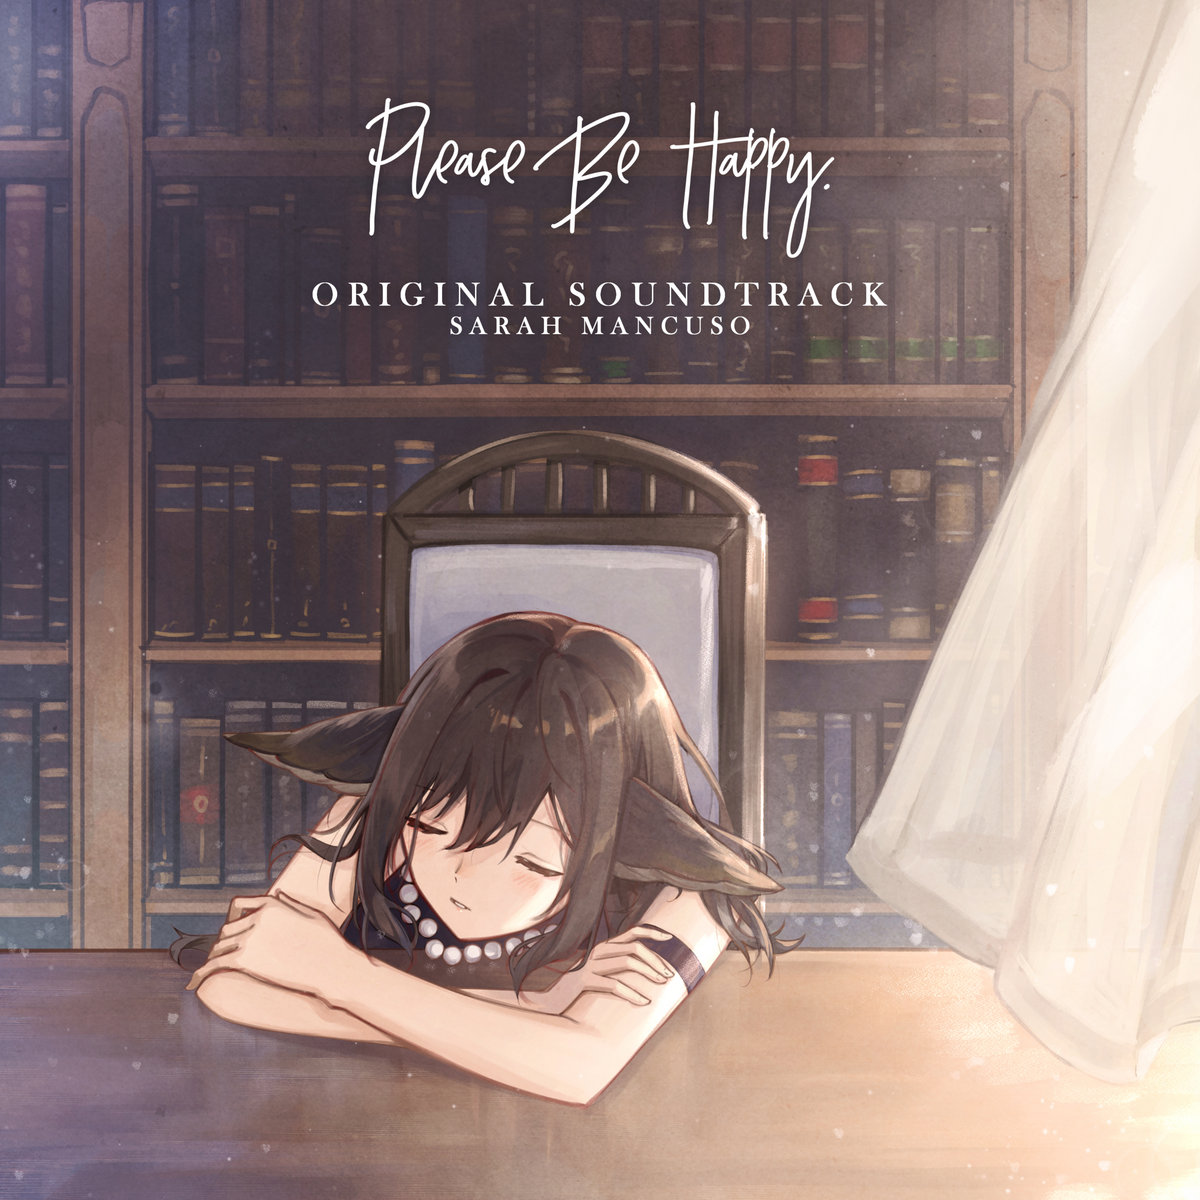 Please Be Happy OST cover art